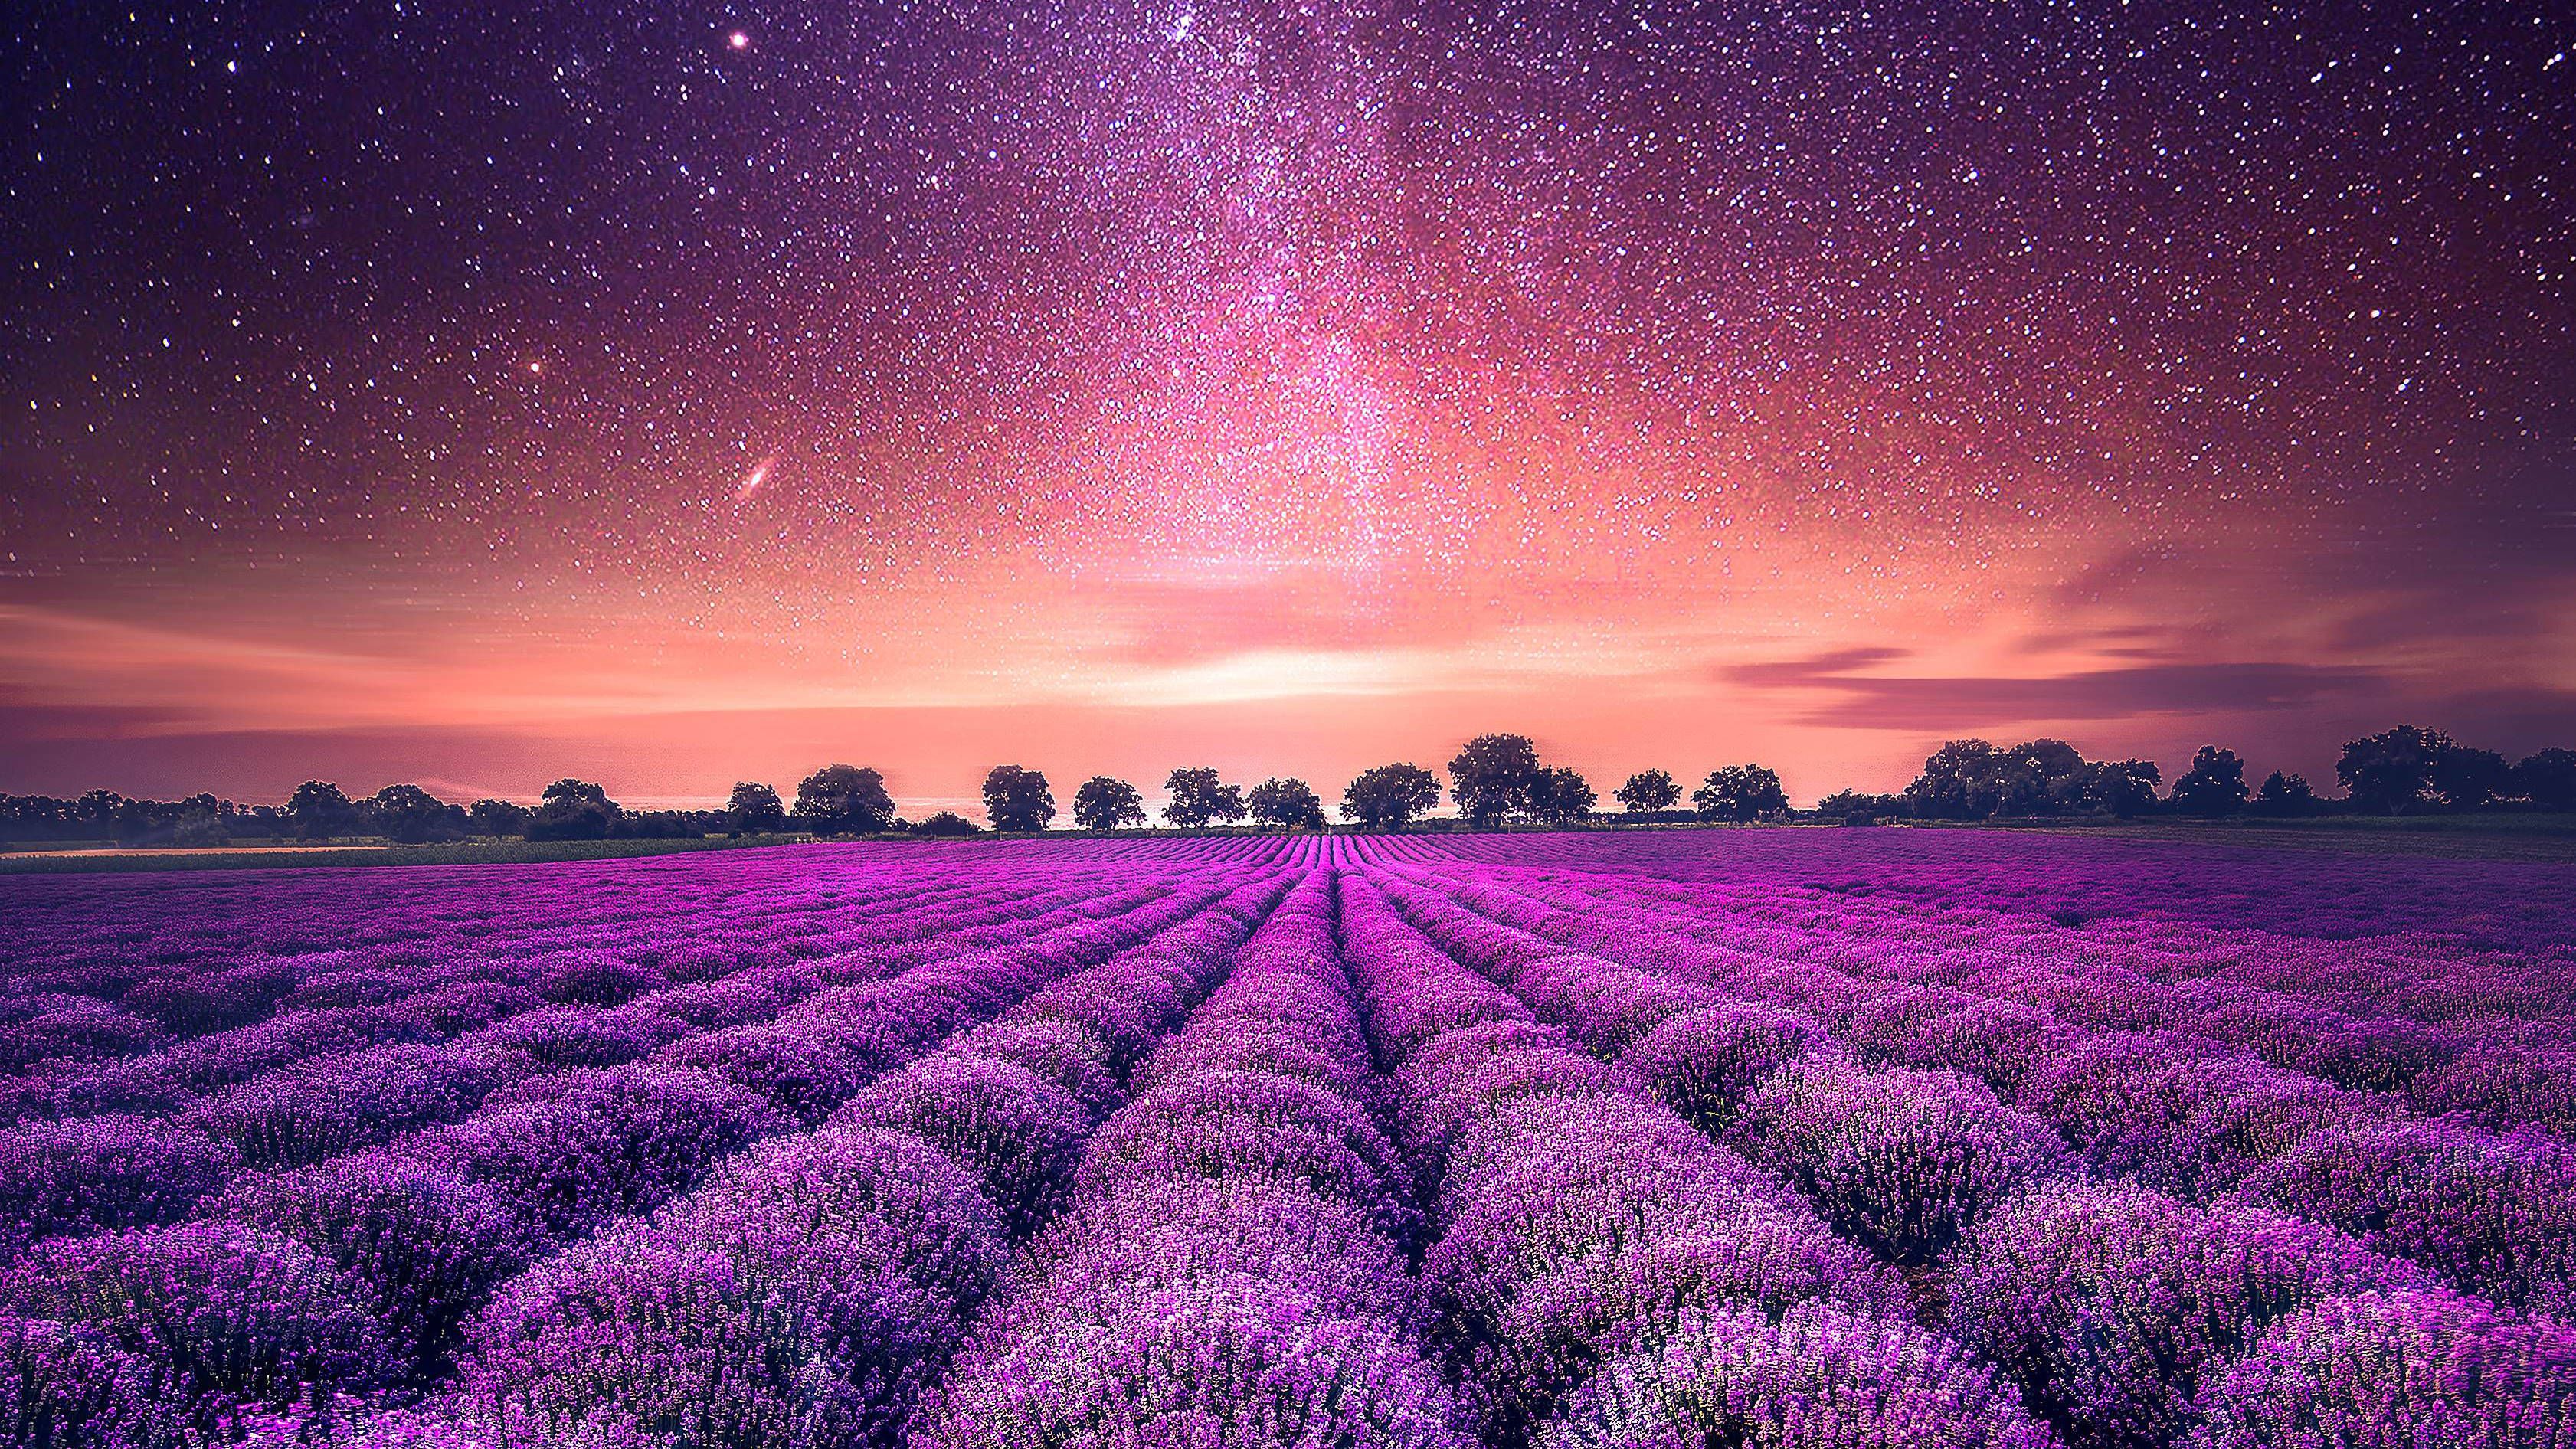 A field of lavender flowers under the stars - Lavender